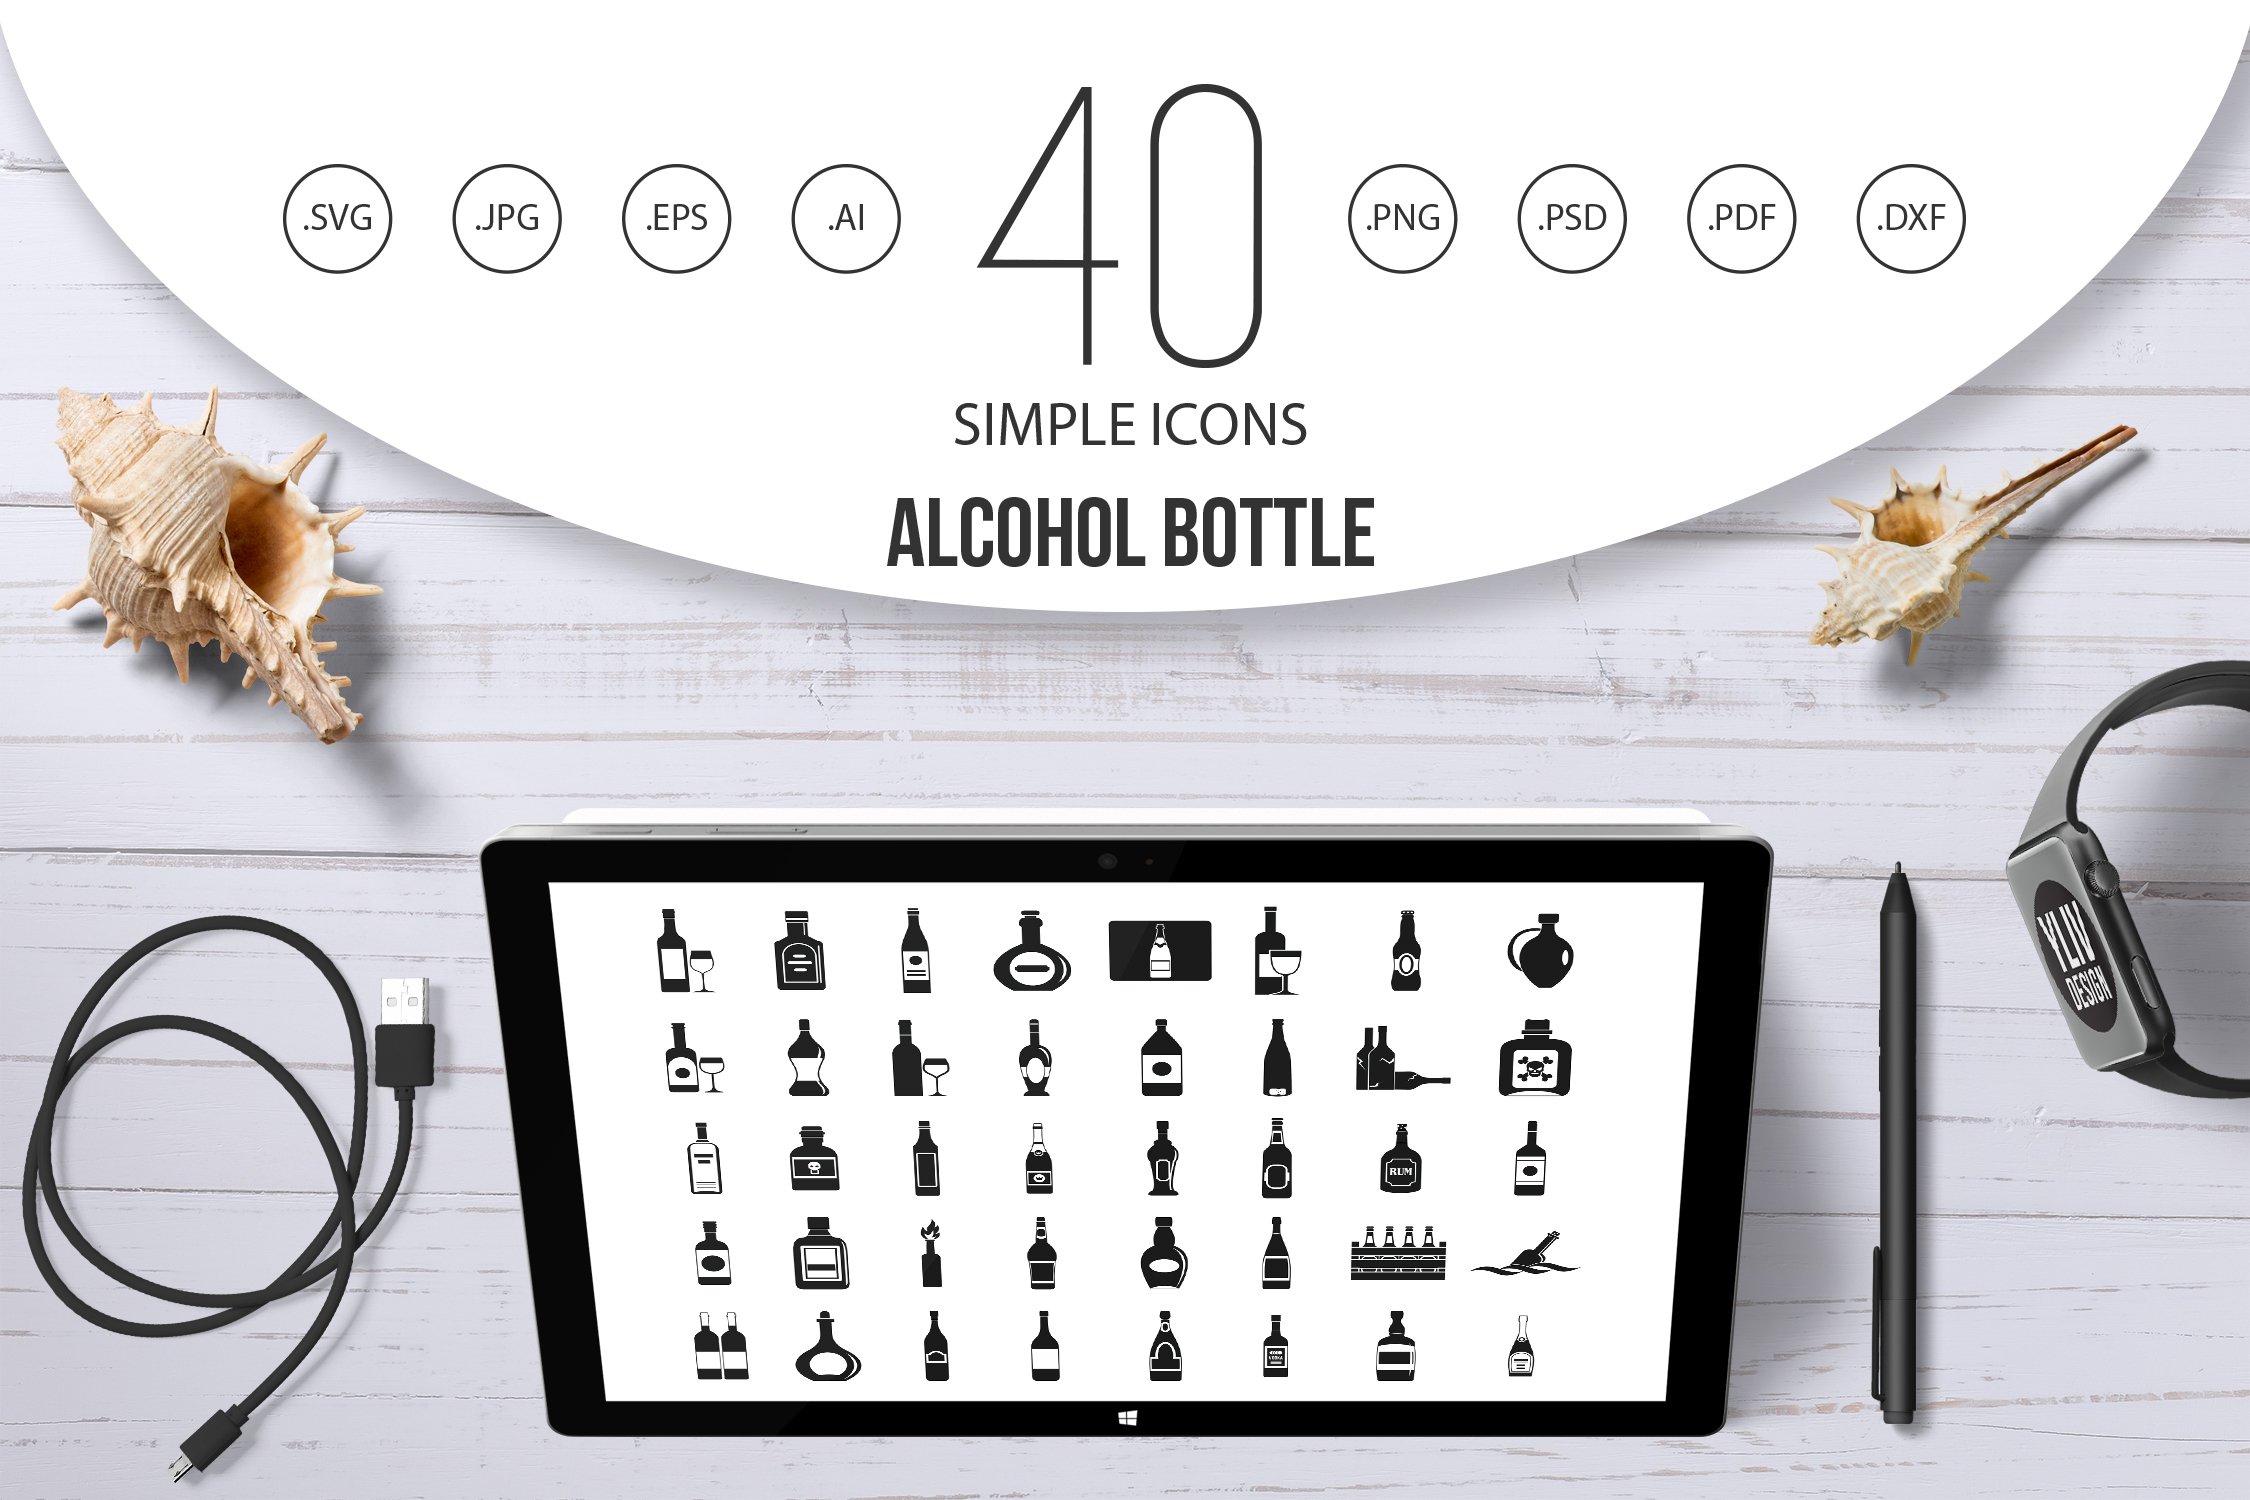 Alcohol bottle icon set, simple cover image.